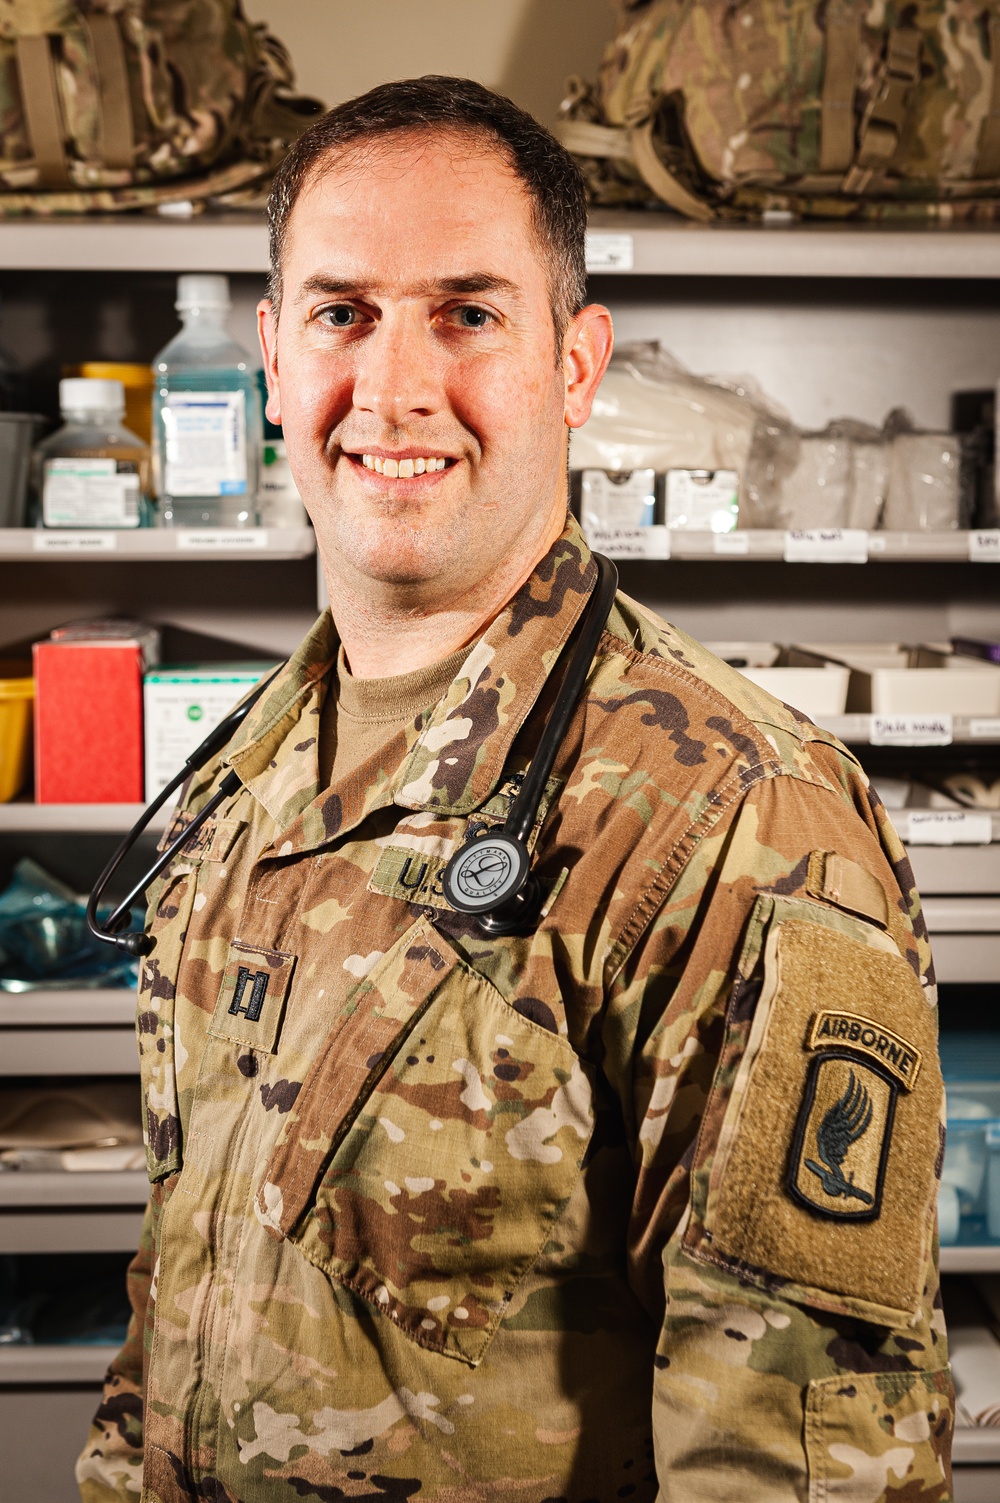 U.S. Army Europe's 2019 Physician's Assistant of the Year